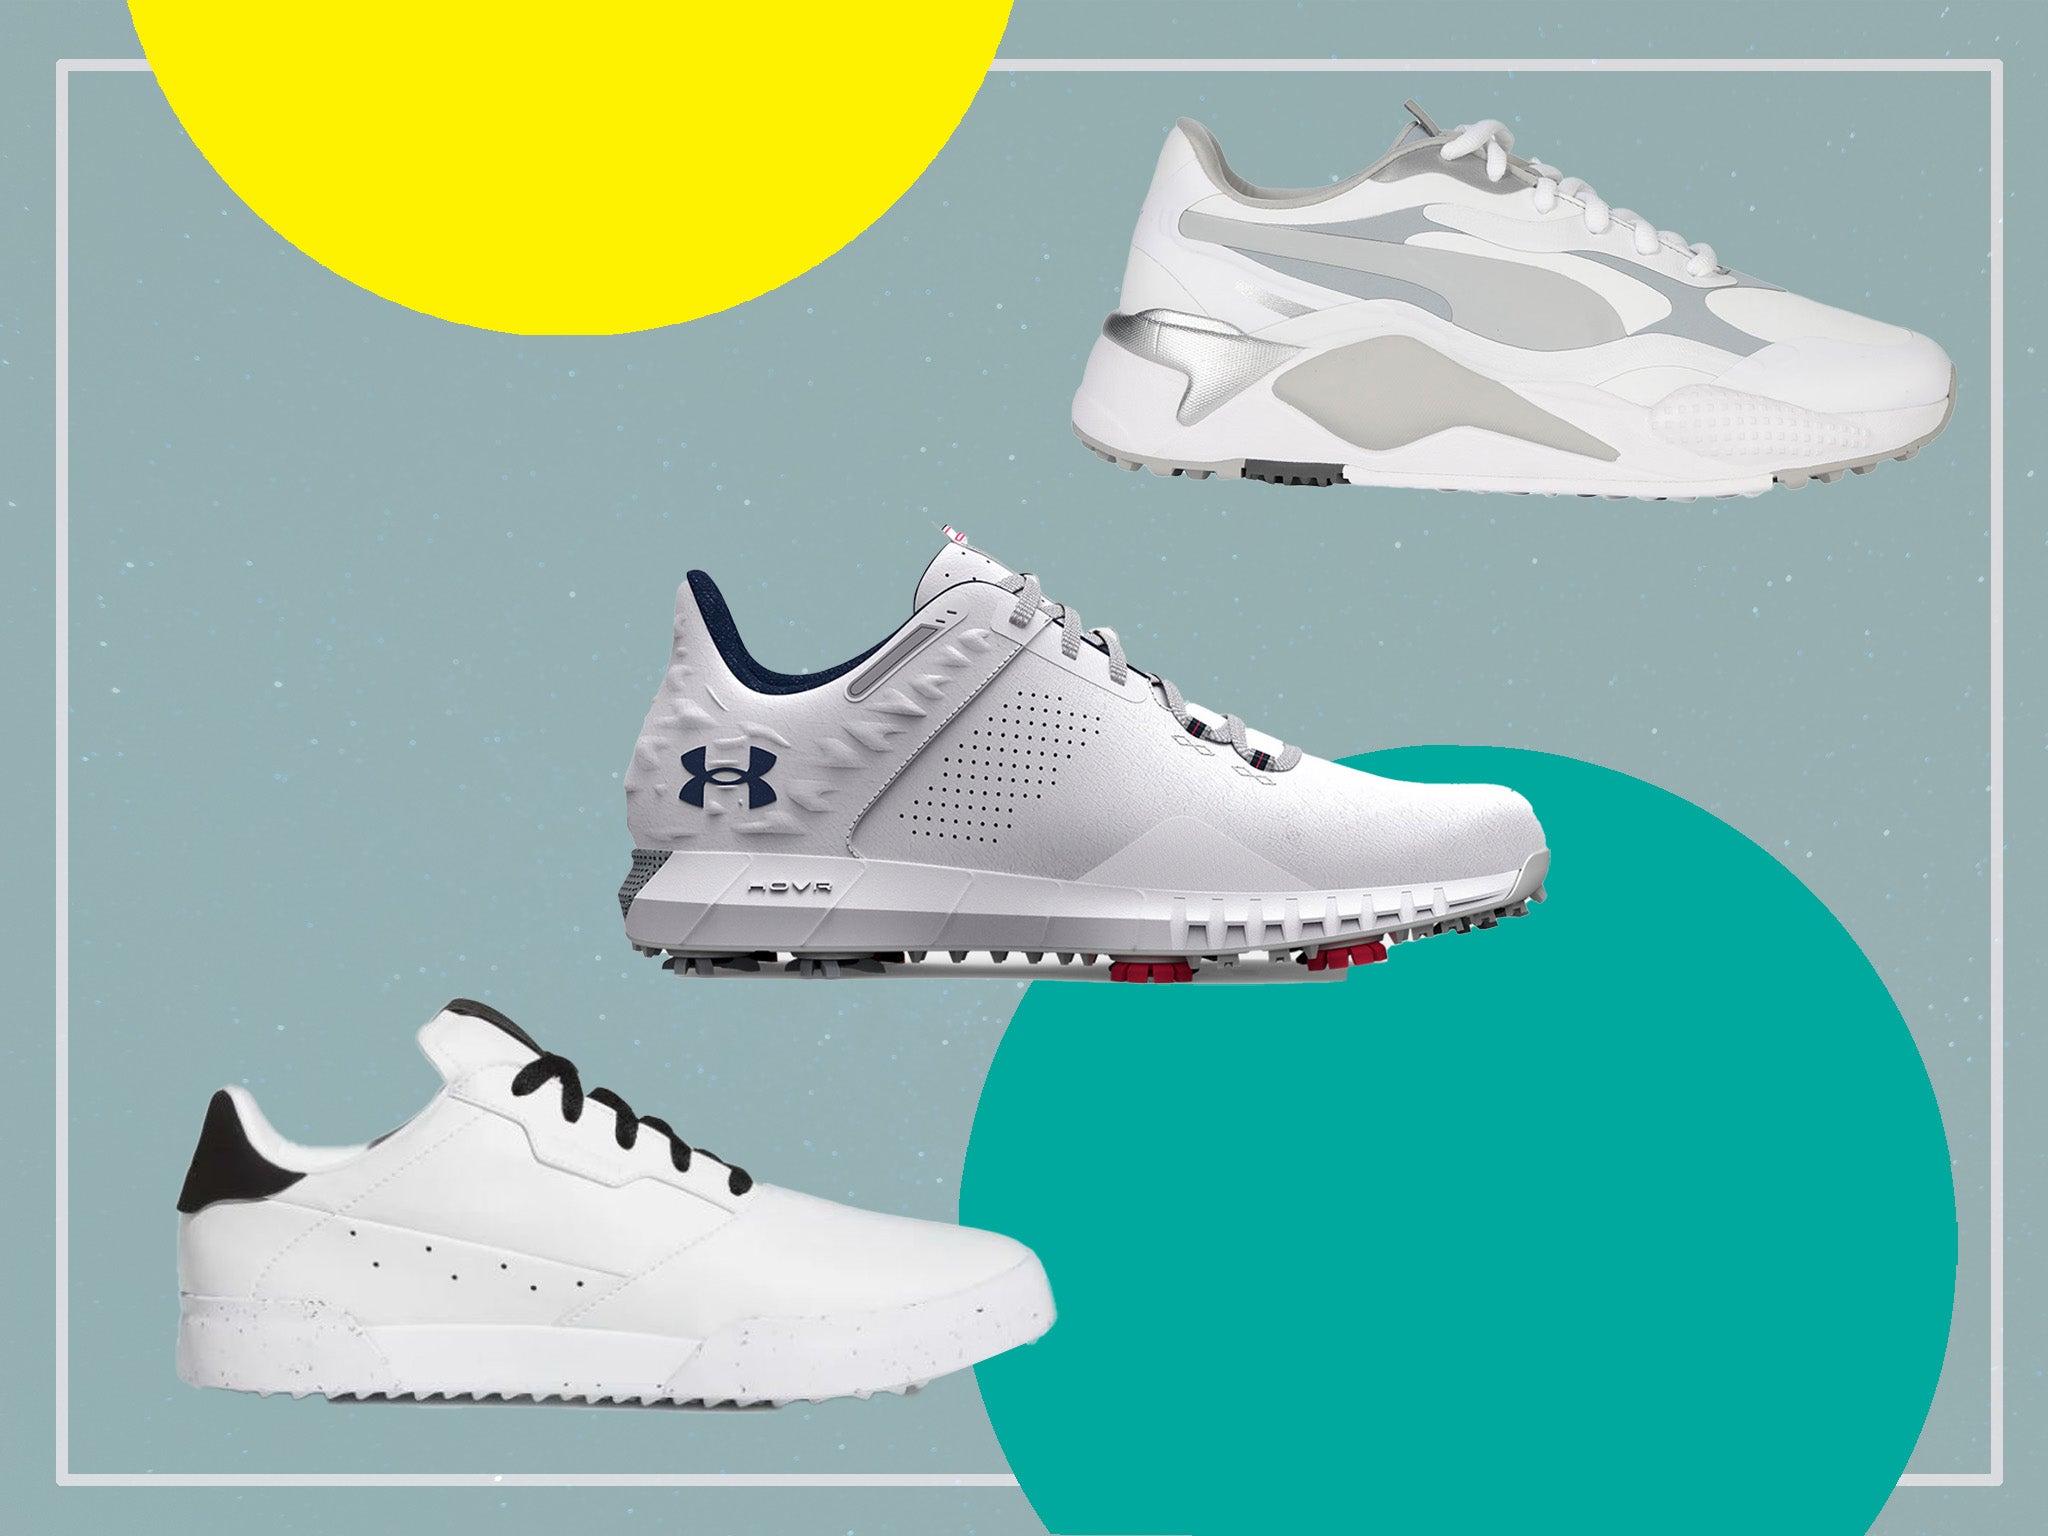 Best men's golf shoes 2022: Spiked 